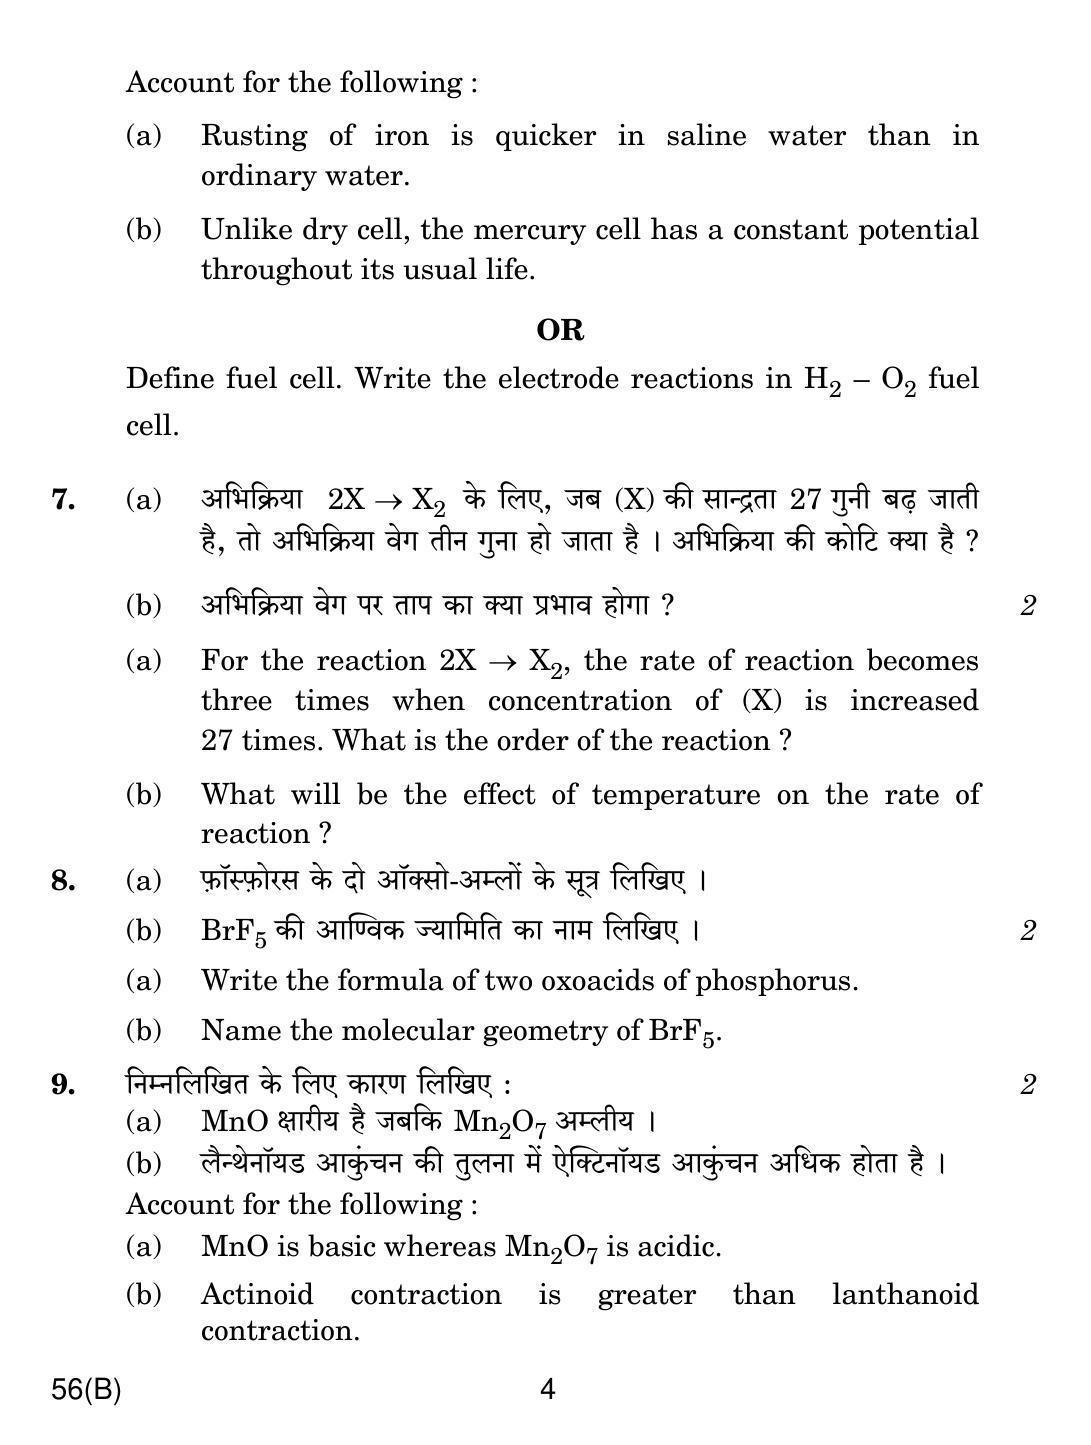 CBSE Class 12 56(B) CHEMISTRY FOR BLIND CANDIDATES 2018 Question Paper - Page 4